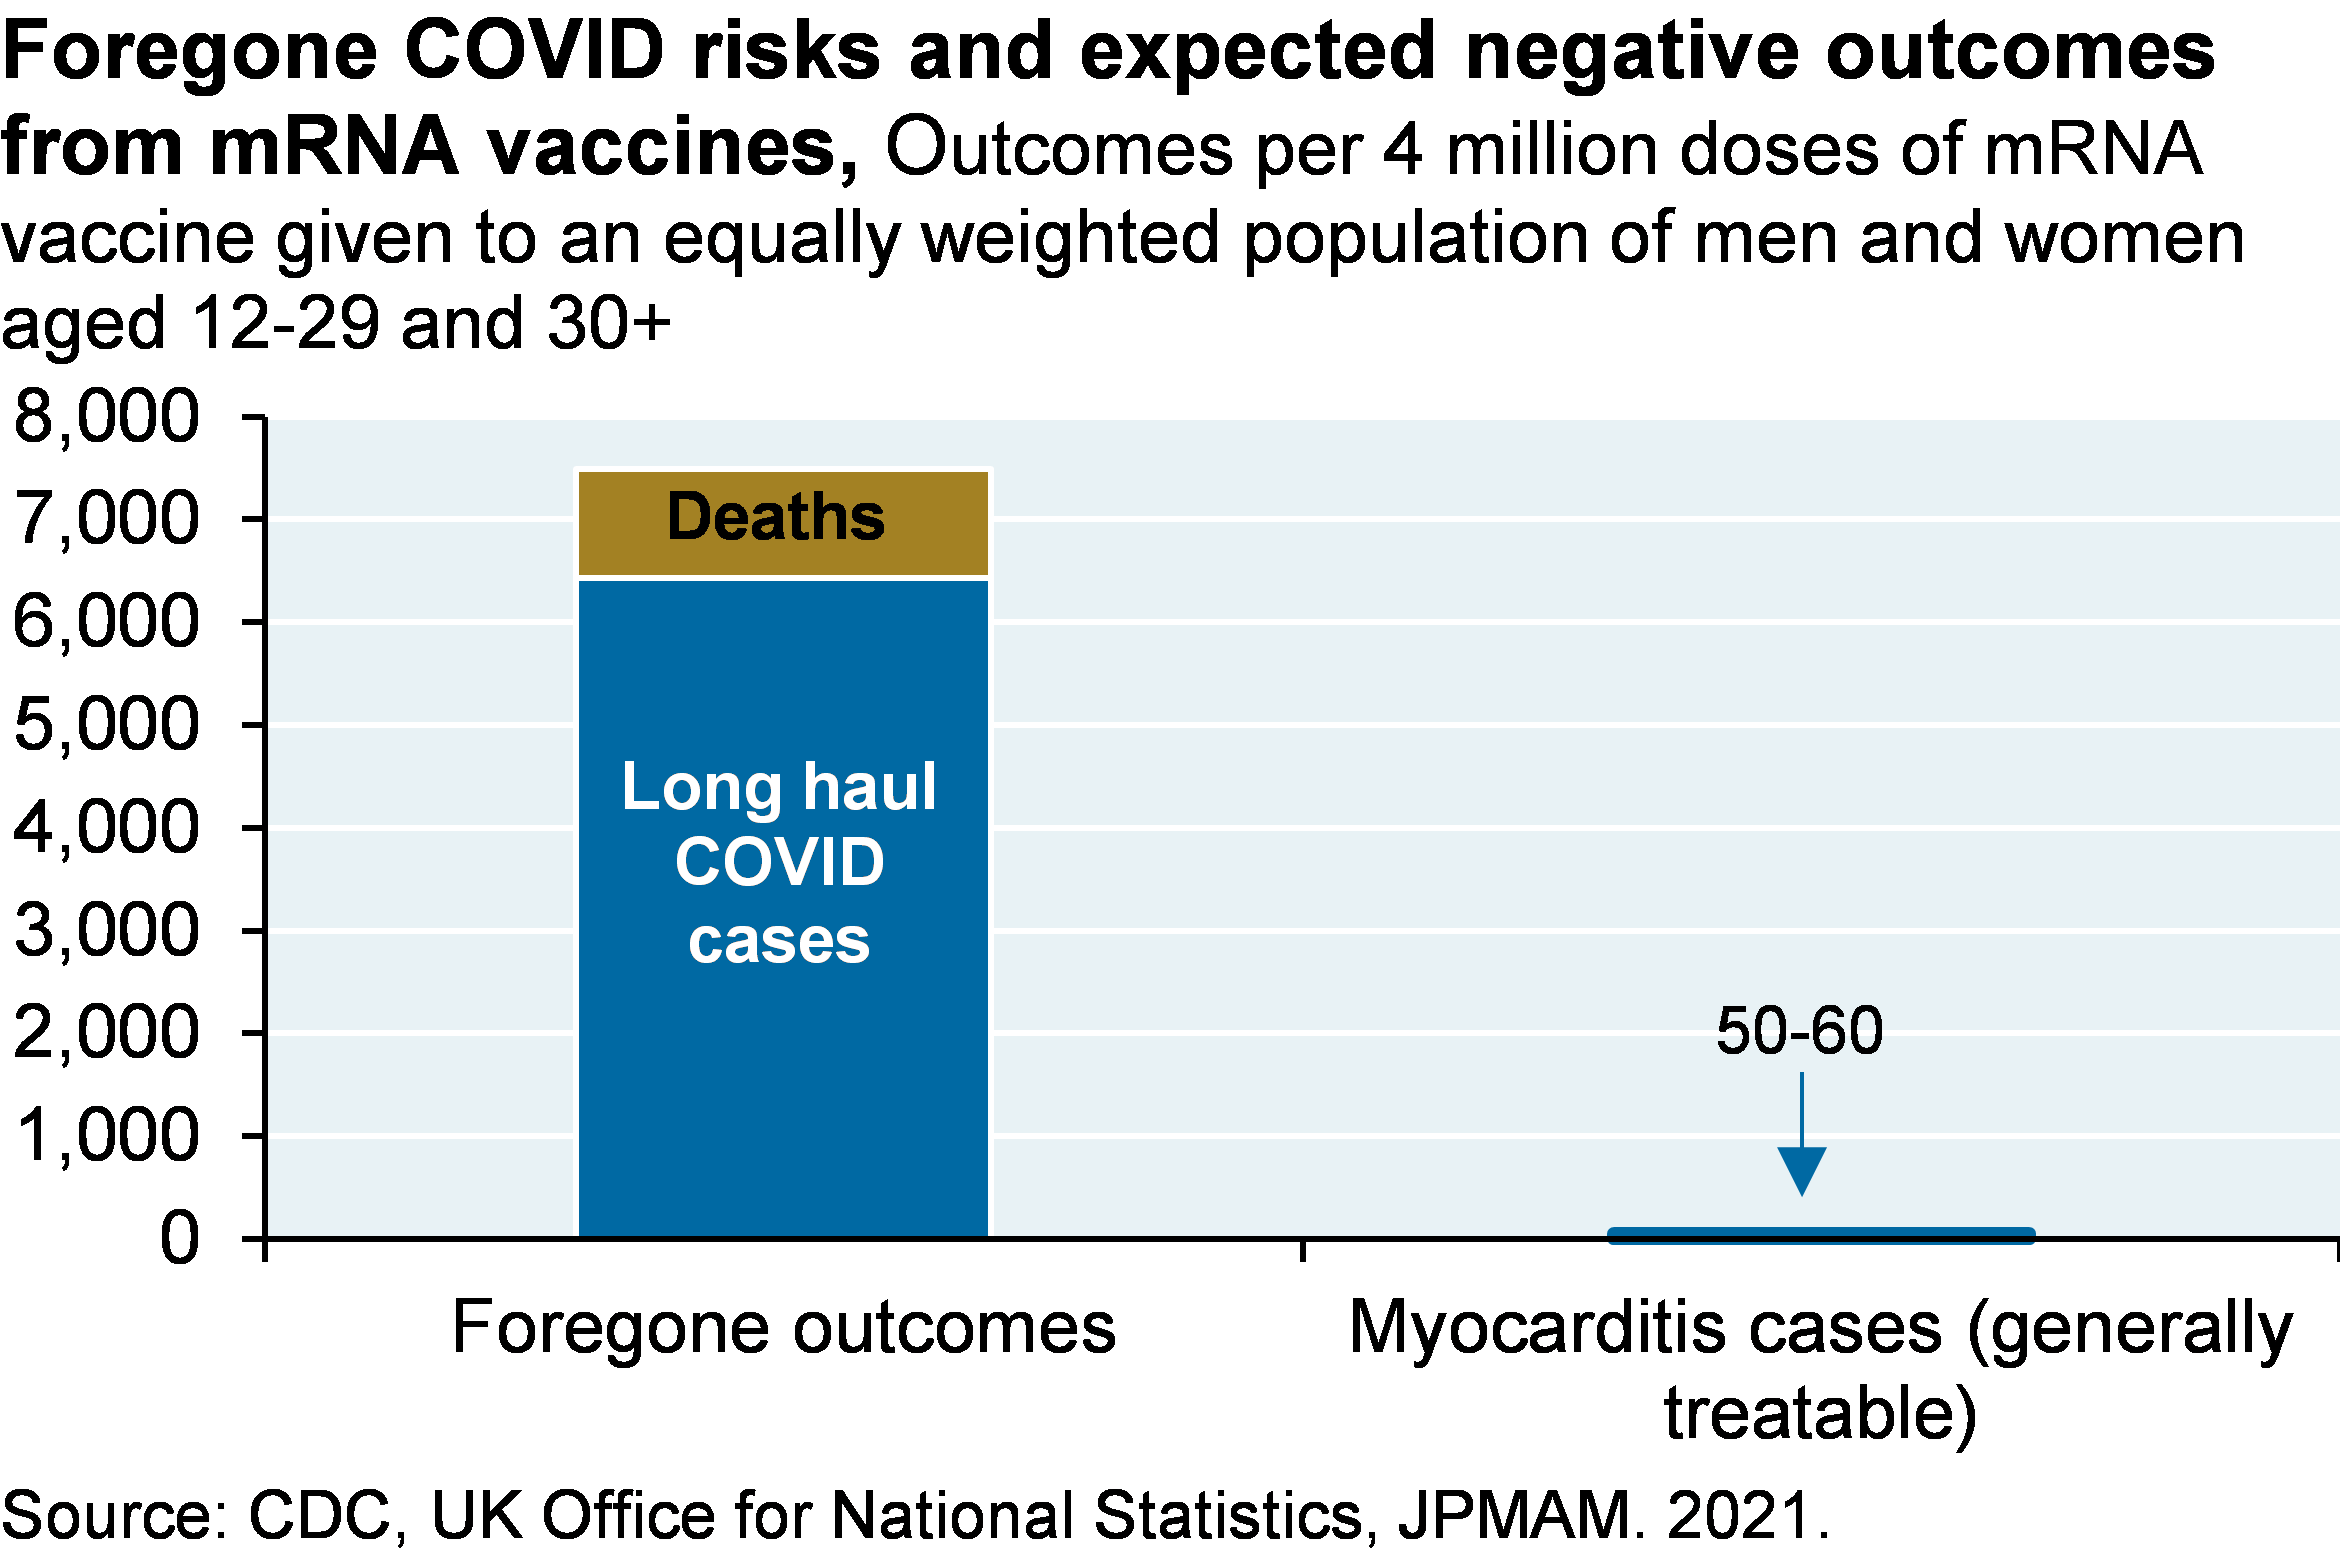 Bar chart shows foregone outcomes, including about 6,500 long haul COVID cases and about 1,000 deaths, per 4 million doses of mRNA vaccines administered, compared to the 50-60 cases of myocarditis, which is generally treatable. 